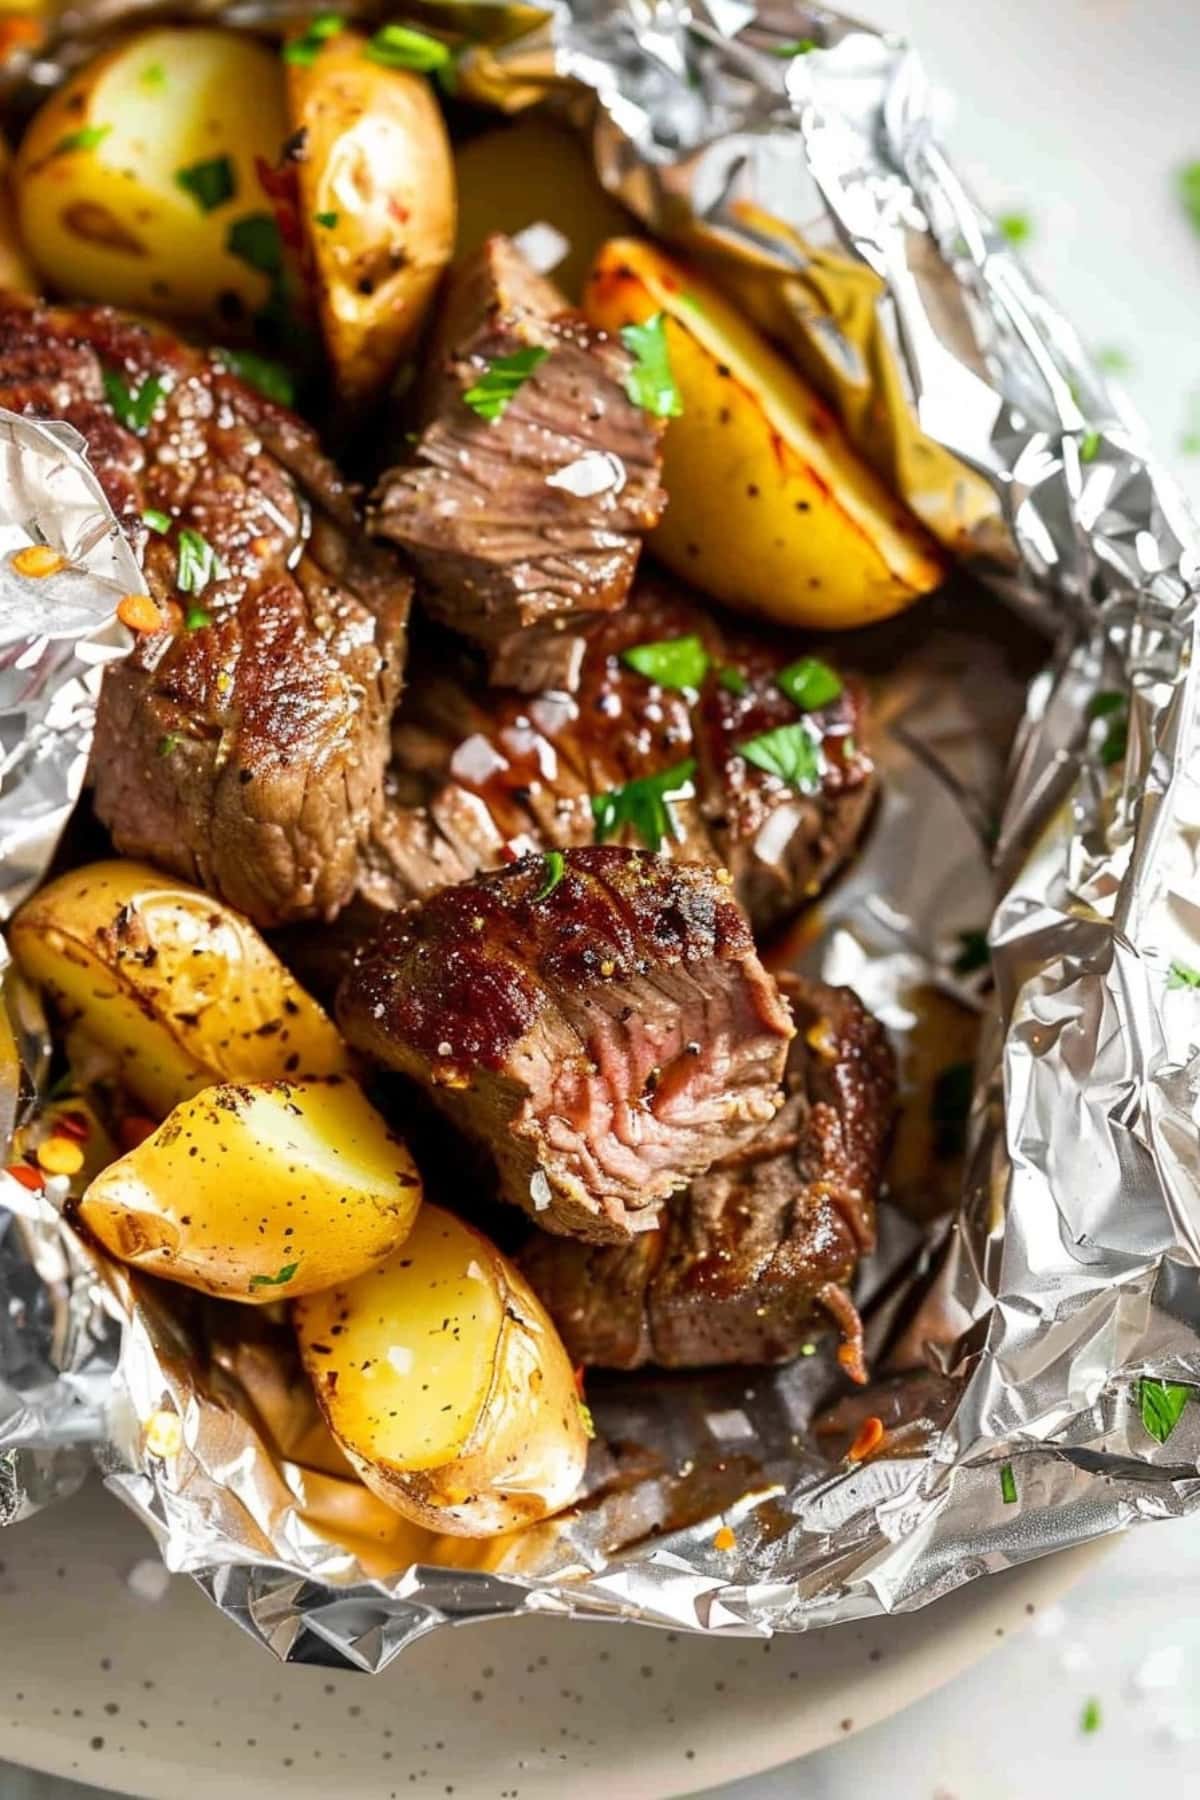 Cube sliced steak and baby potatoes grilled while inside an aluminum foil packet.